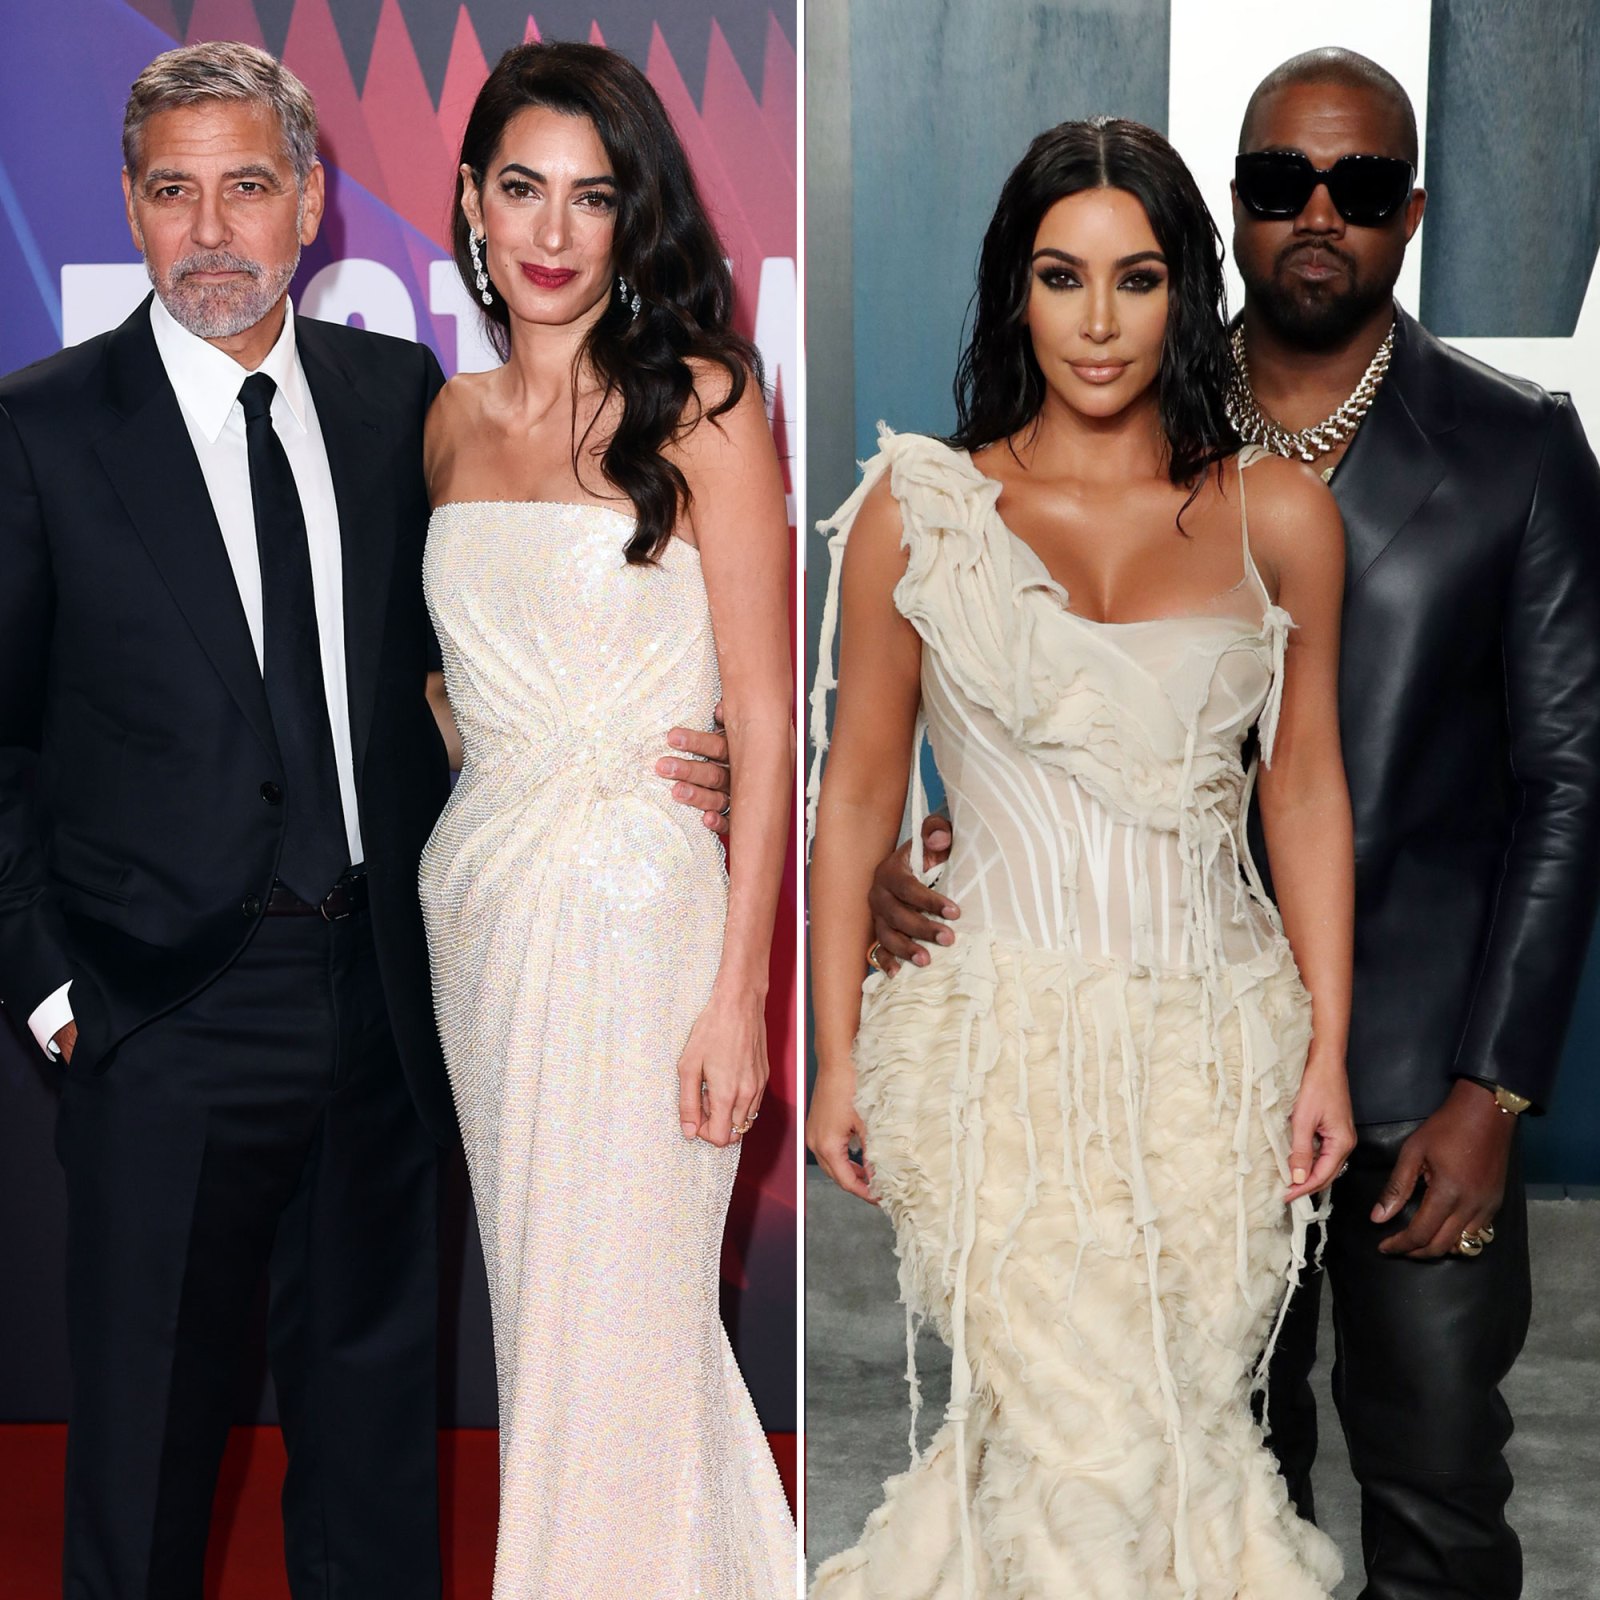 Most Romantic Celeb Weddings in Italy Through the Years George and Amal Clooney Kim Kardashian and Kanye West More